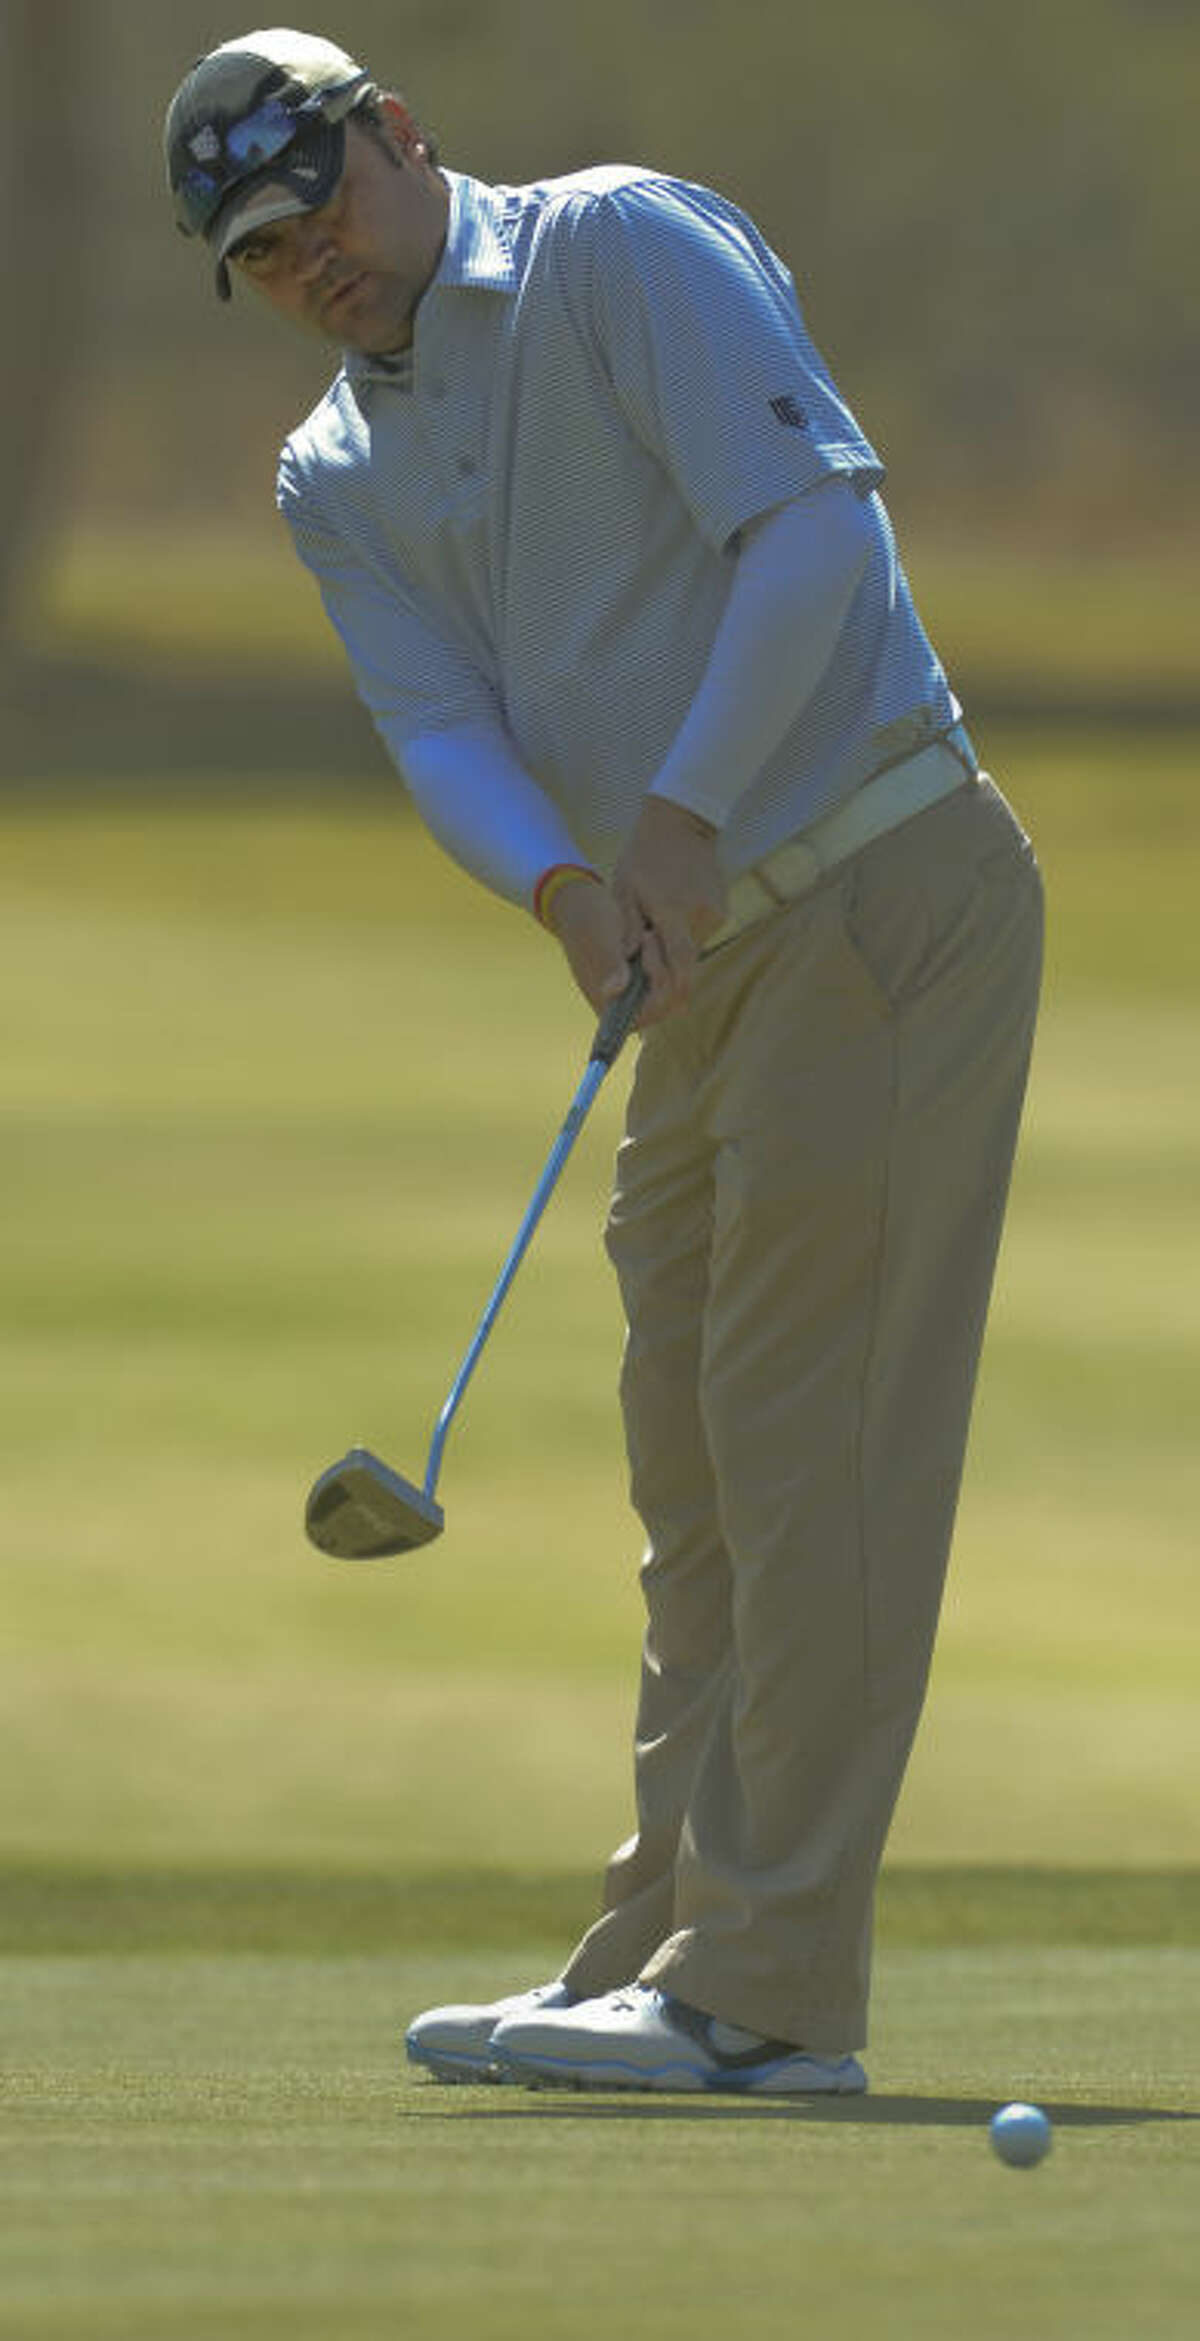 Uitwisseling Moedig krab GOLF: MCC Asst. Pro Rhind tied for 16th at PGA Pro National Championship